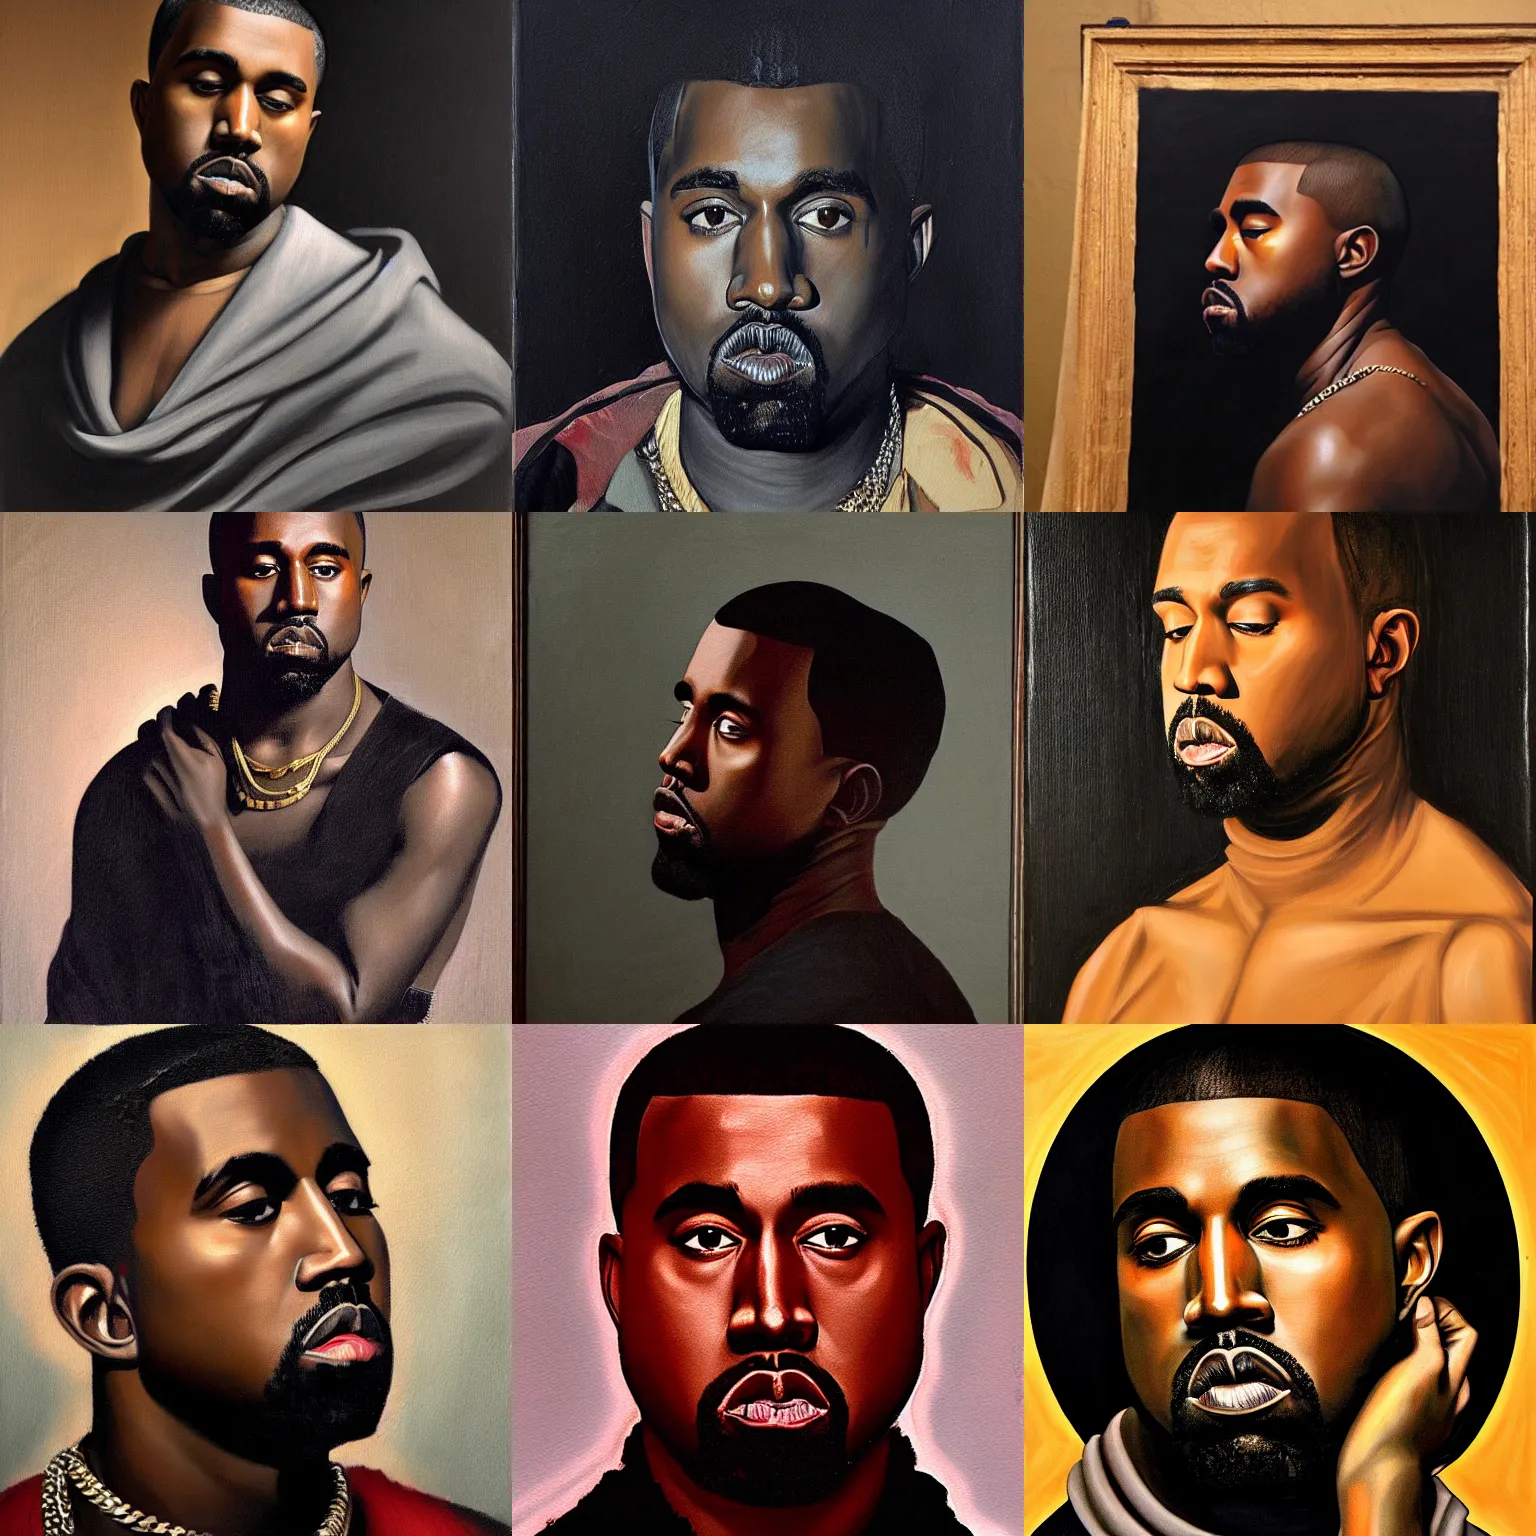 Prompt: a tenebrism painting of kanye west by caravaggio